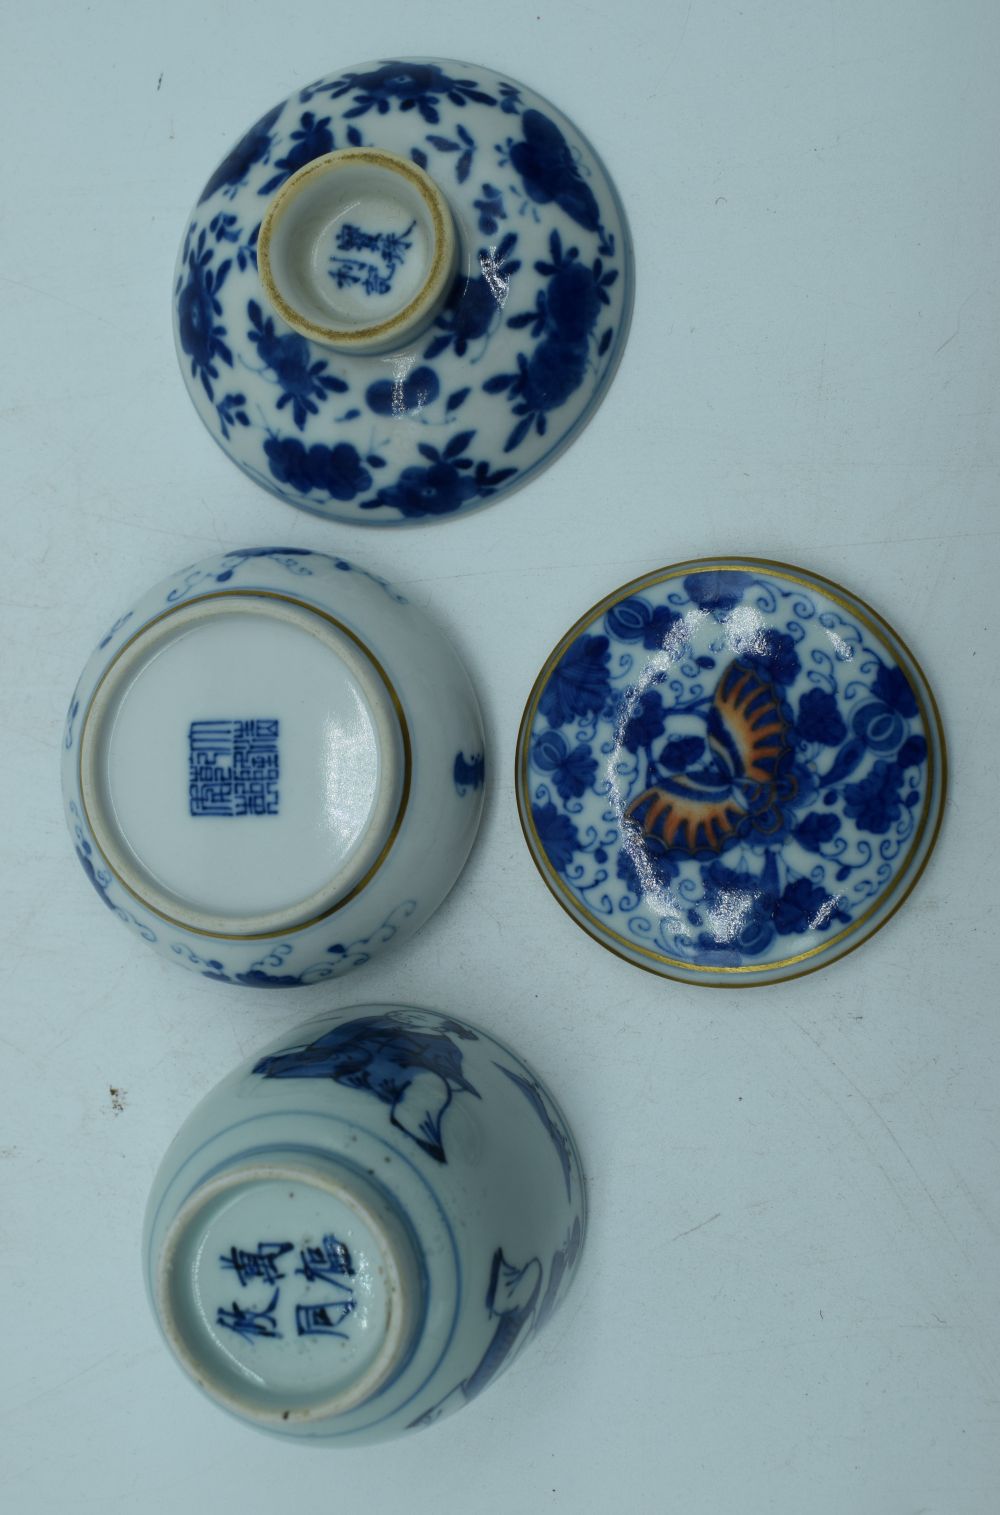 A small Chinese porcelain blue and white Tea bowl together with a cosmetic pot and a small dish - Image 8 of 8